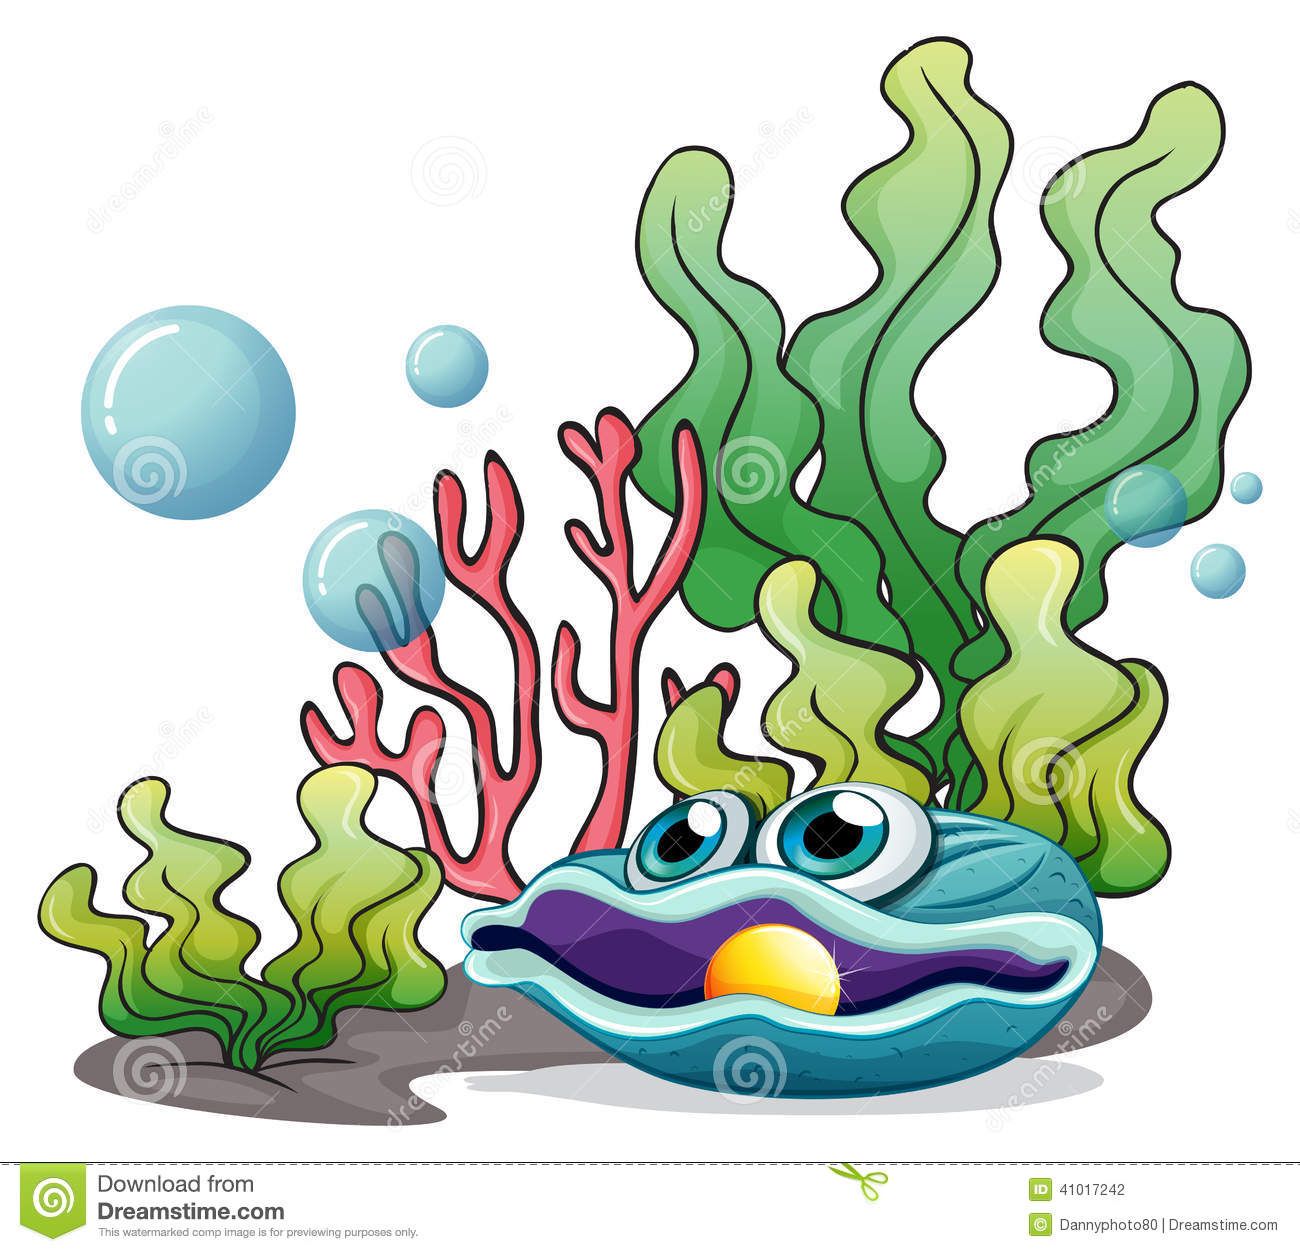 Corals, seaweeds and a clamb under the sea Stock Photography